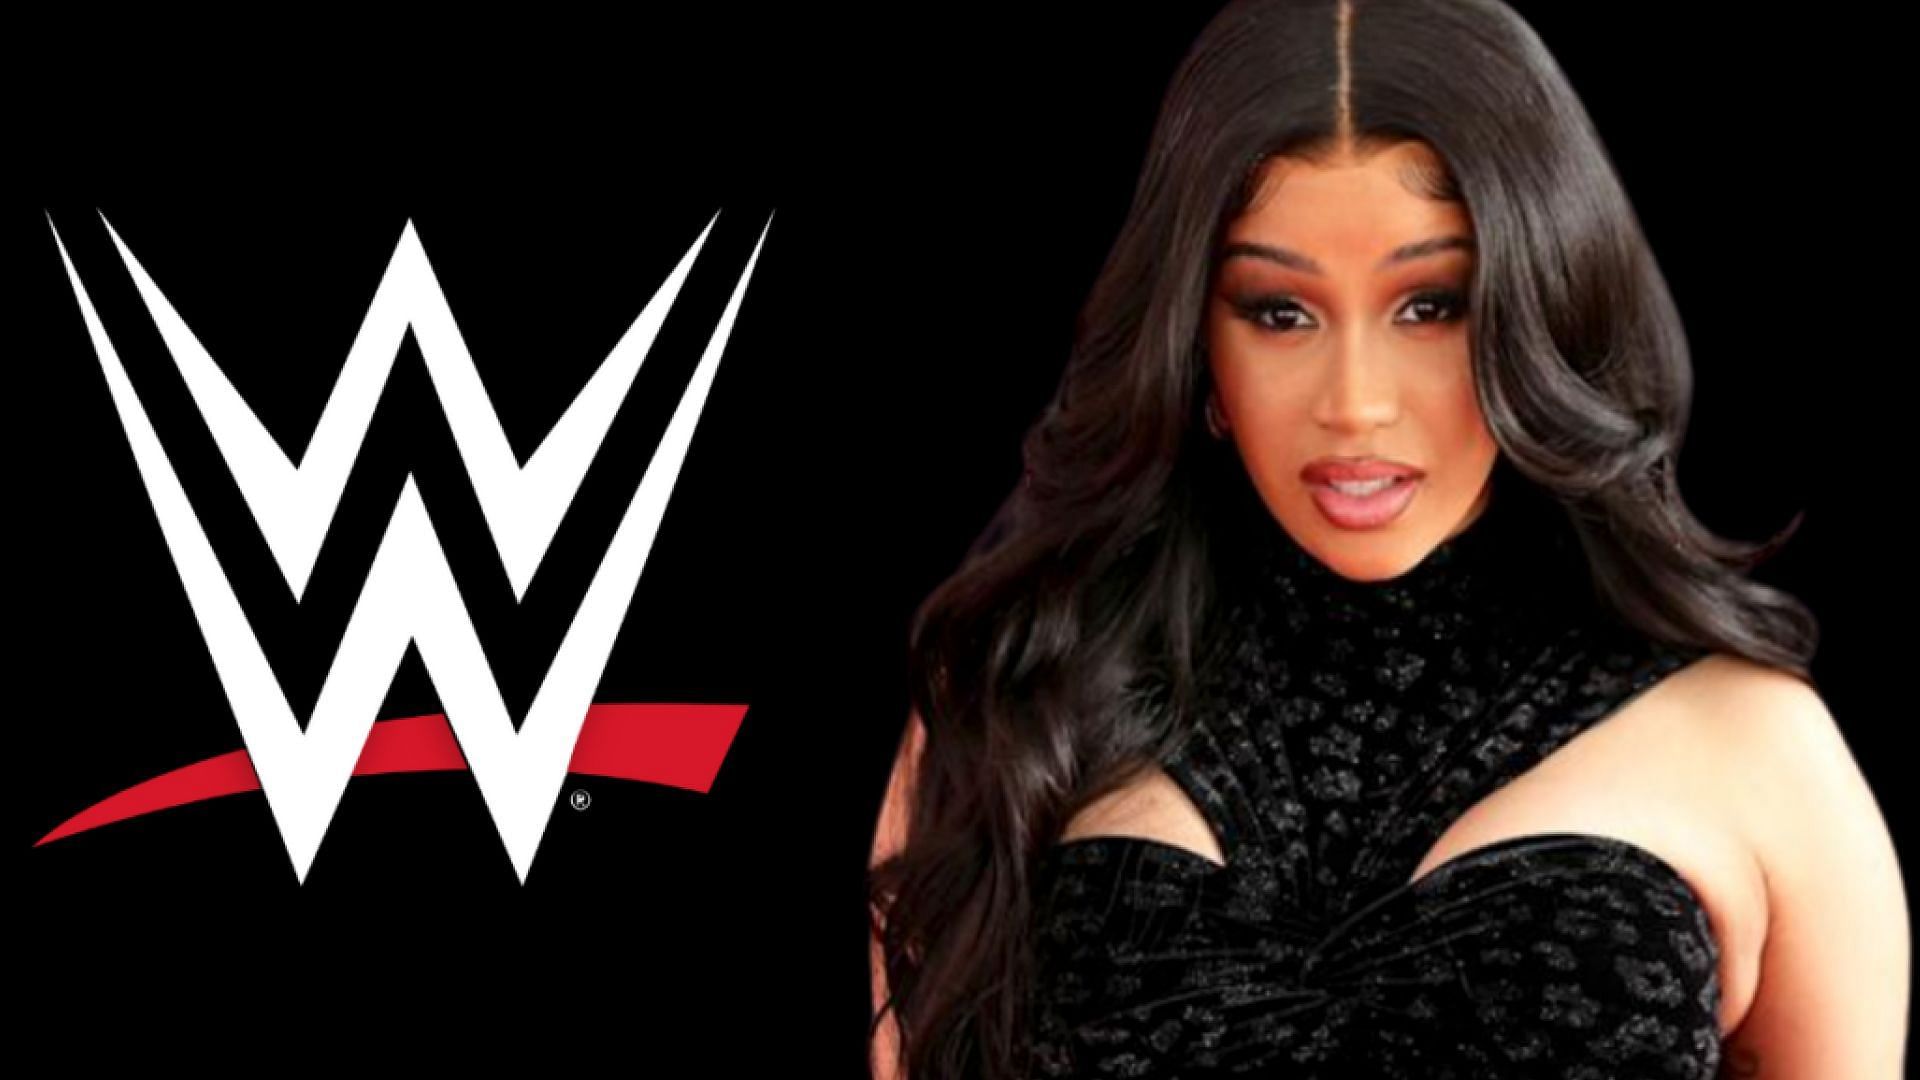 Popular rapper Cardi B has made references to WWE